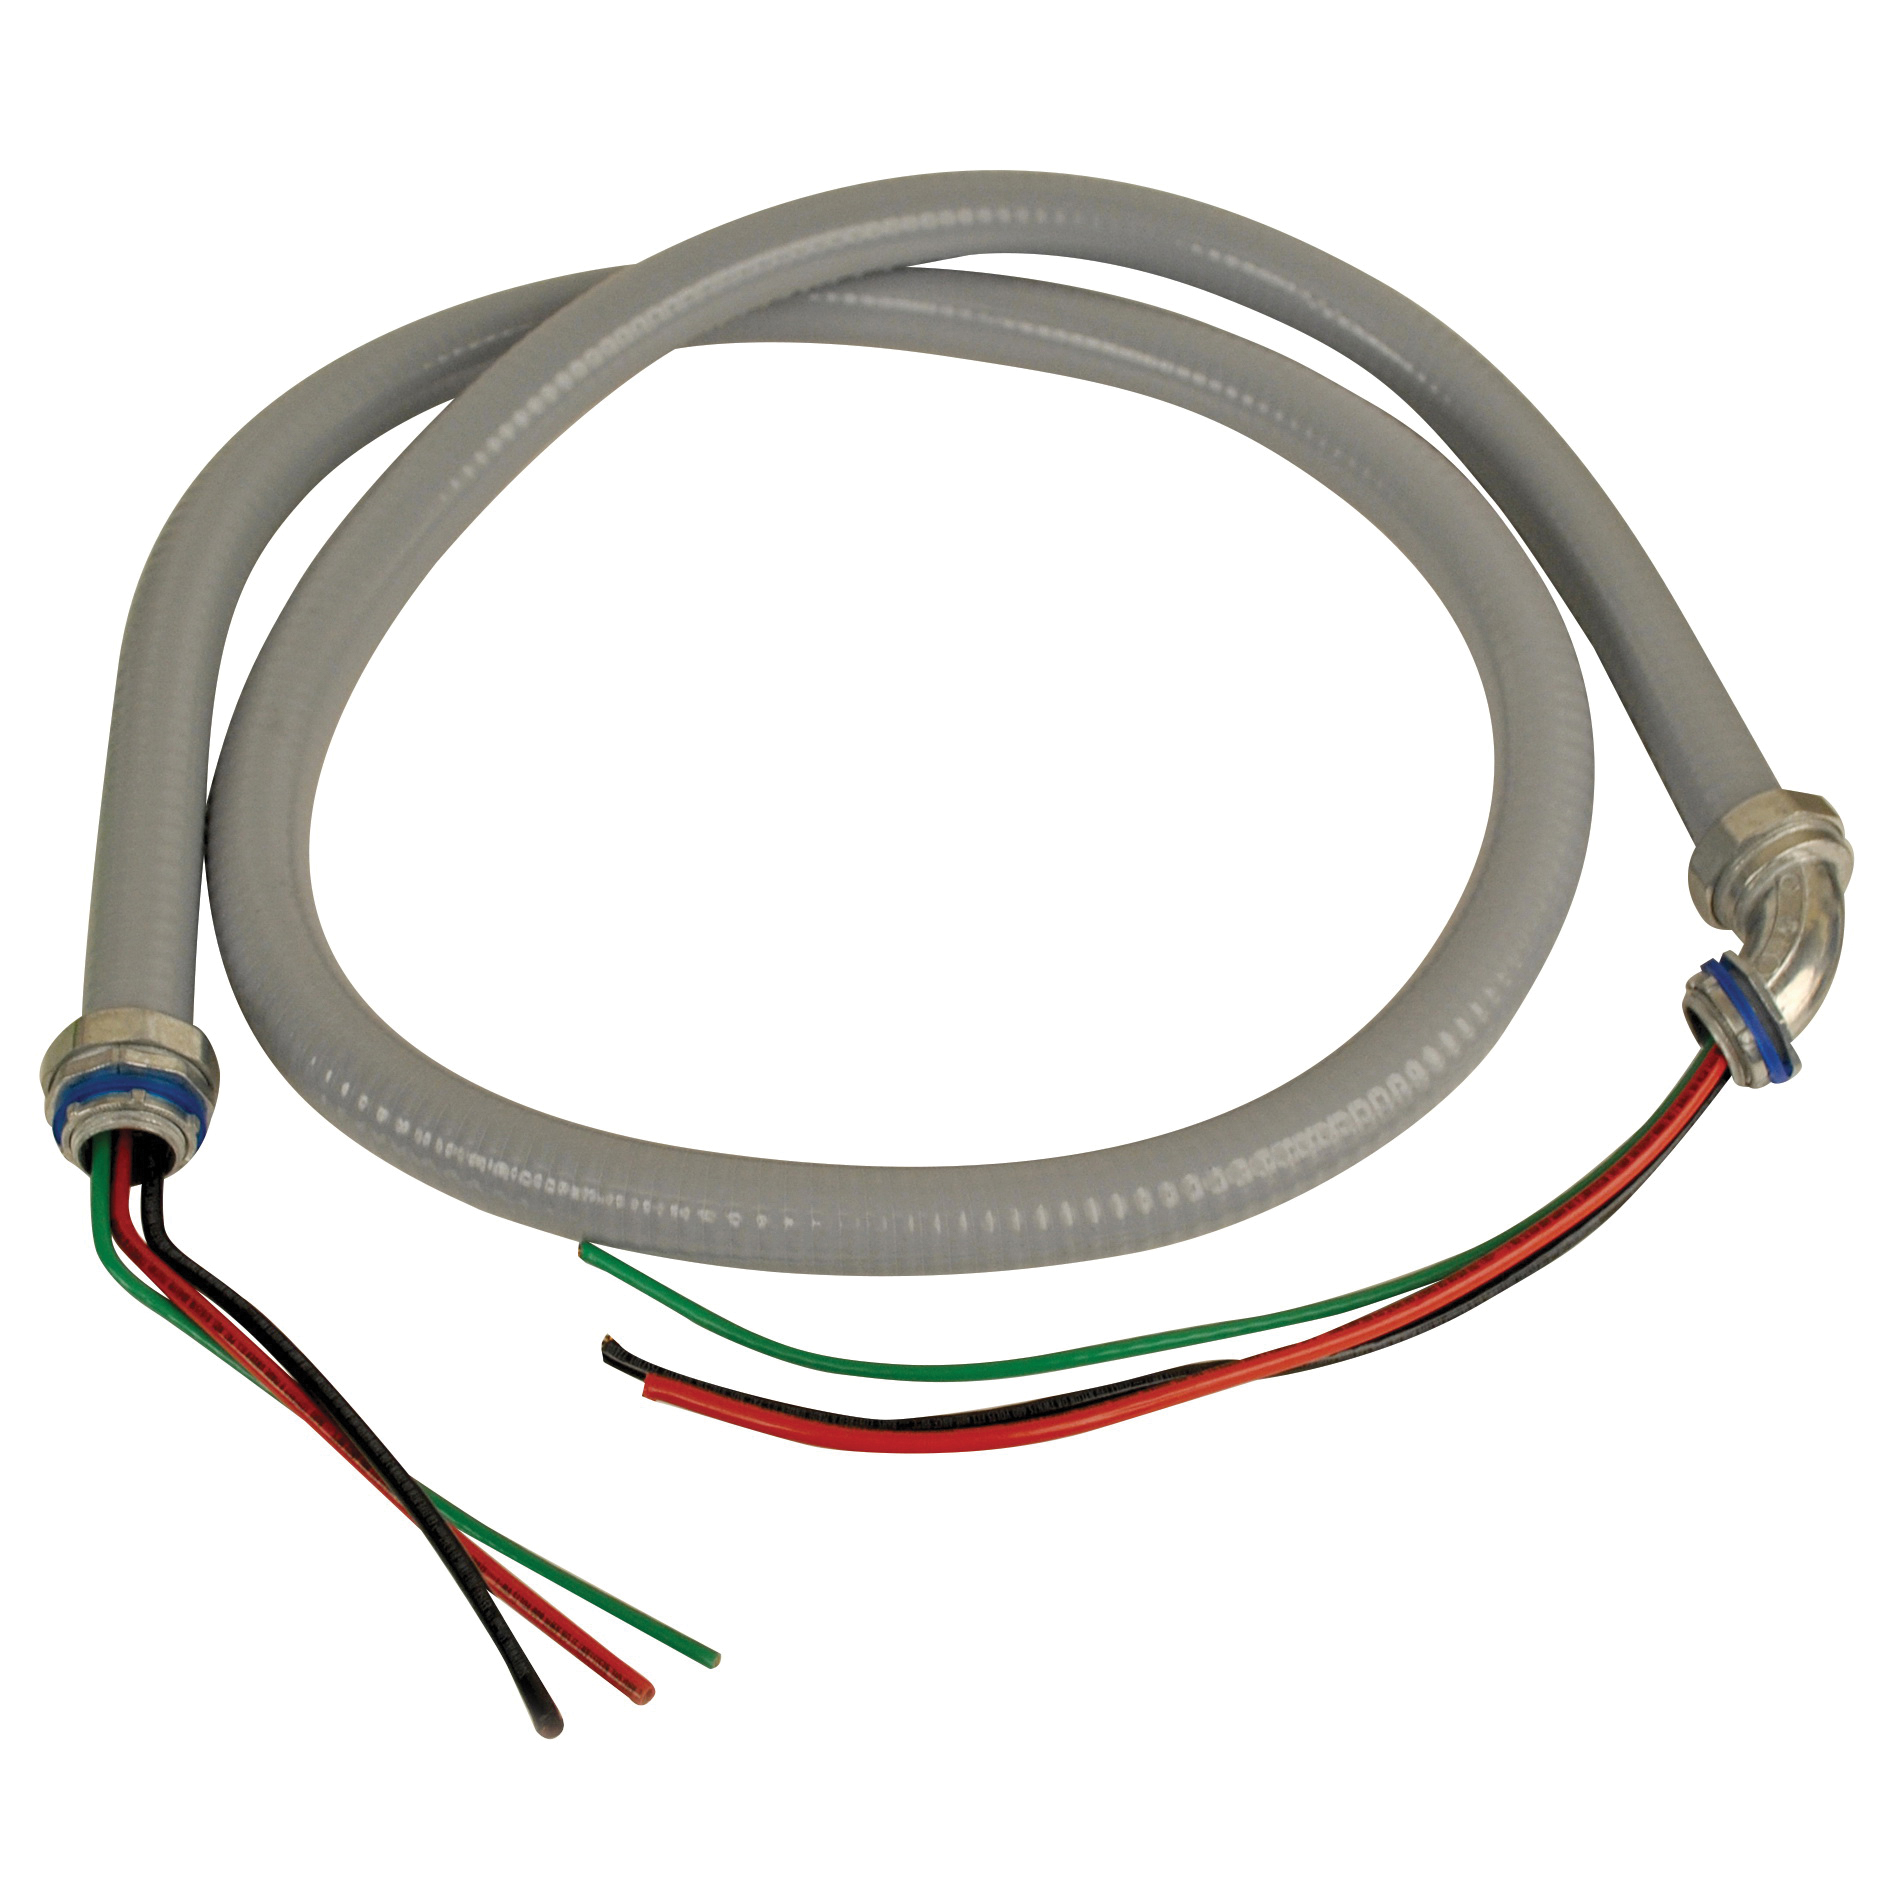 Mars® 84136 Whip, 3-Conductor, 10 AWG Conductor, 6 ft L, For Use With: Non-Metallic Liquid-Tight Flexible Conduit